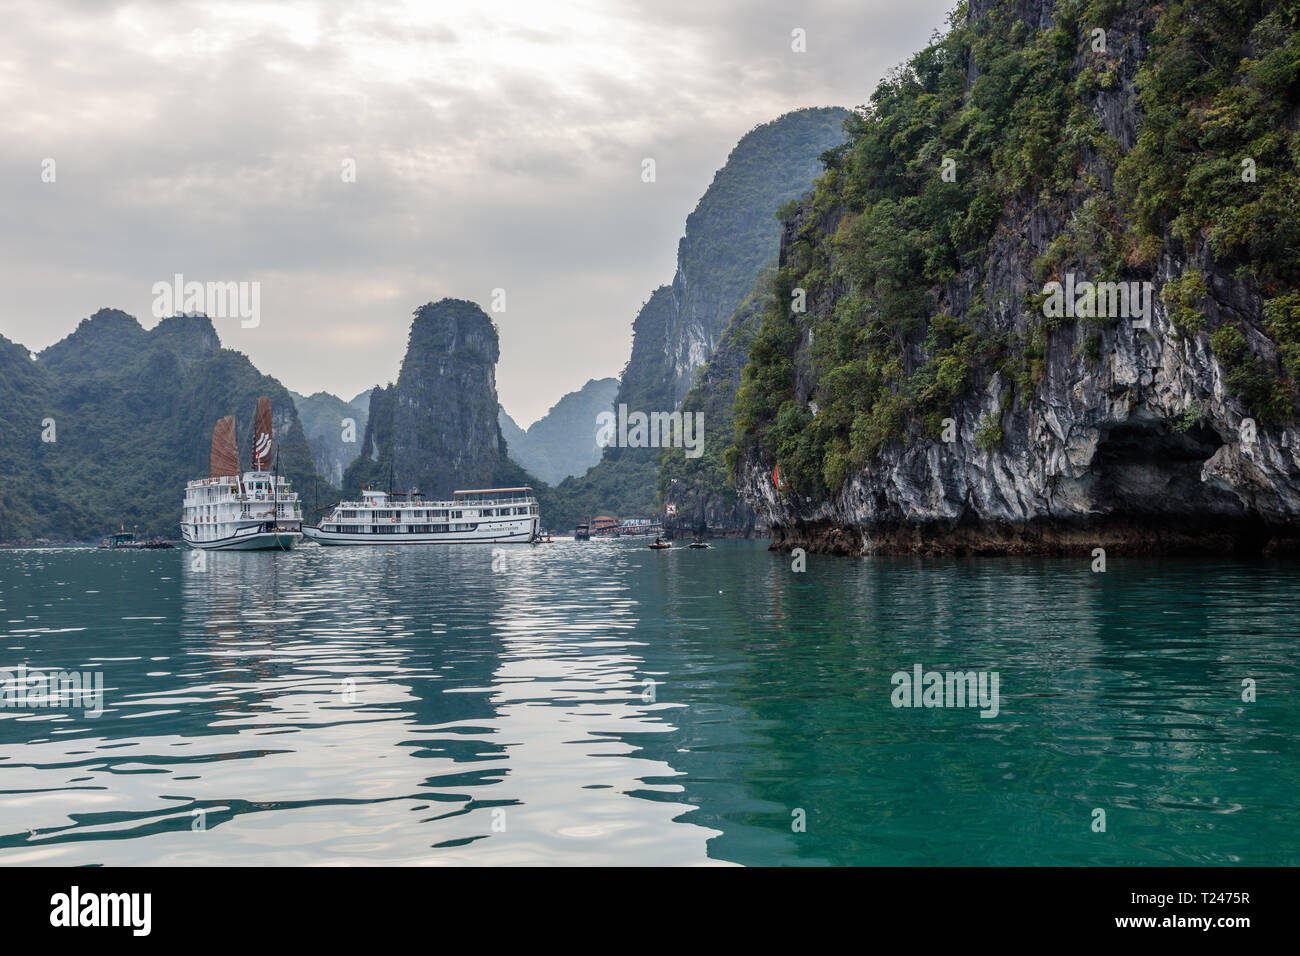 Halong Bay (Ha Long Bay) in Northern Vietnam. Day time. Stock Photo